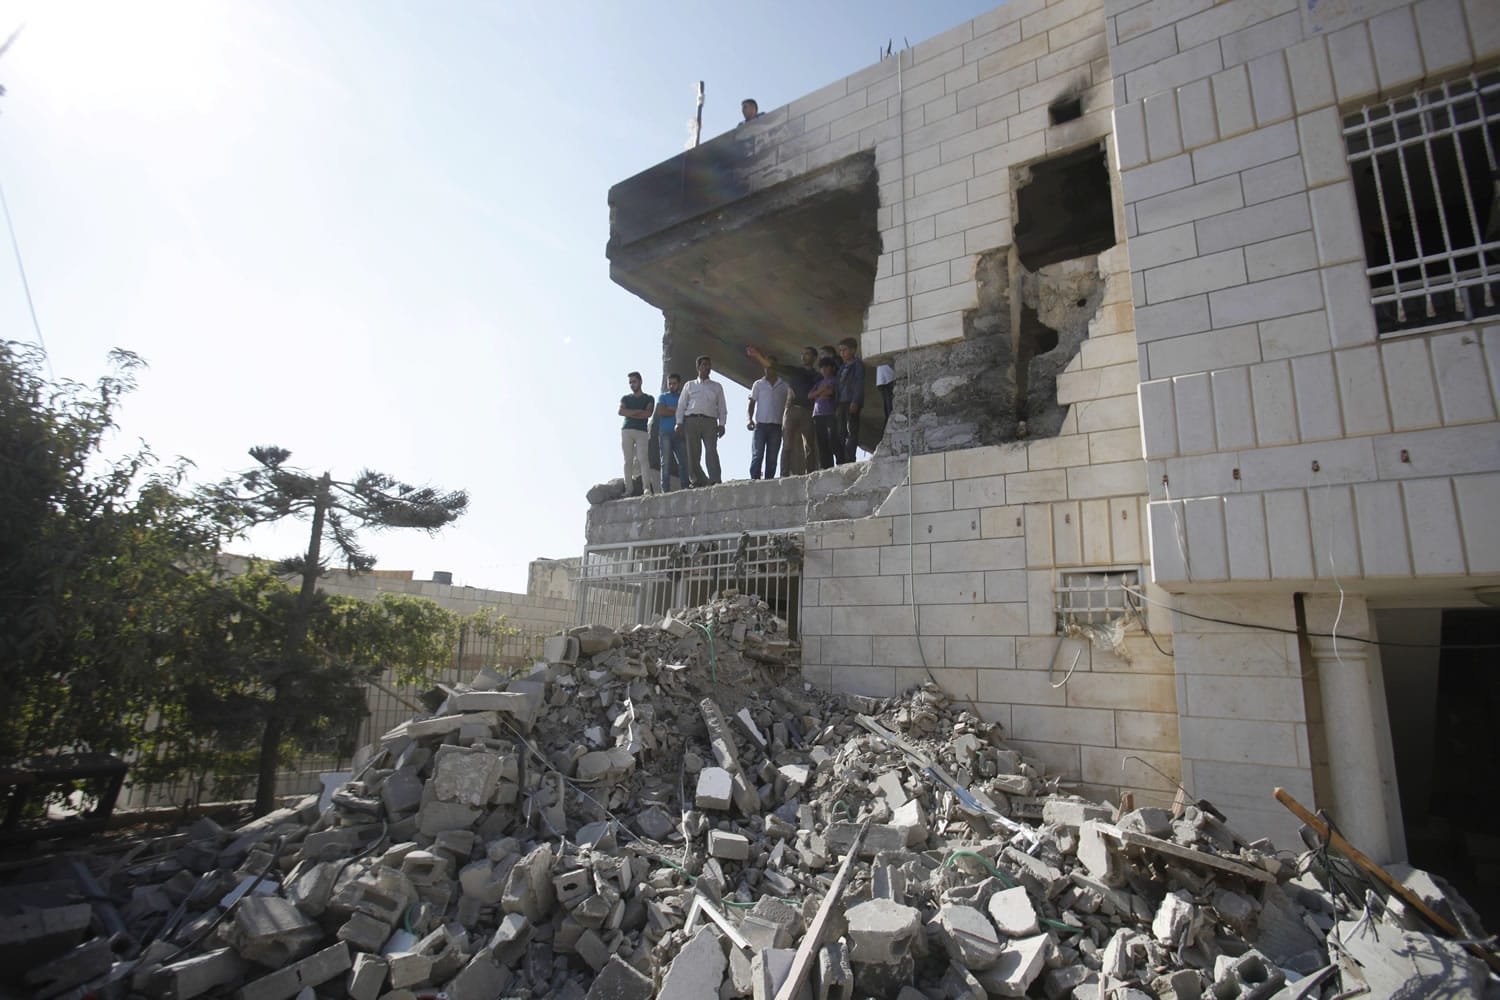 Palestinians stand in what is left of the home of Amer Abu Aisheh, one of three Palestinians identified by Israel as suspects in the killing of three Israeli teenagers, after it was demolished by the Israeli army in the West Bank city of Hebron, Monday, Aug. 18 , 2014.